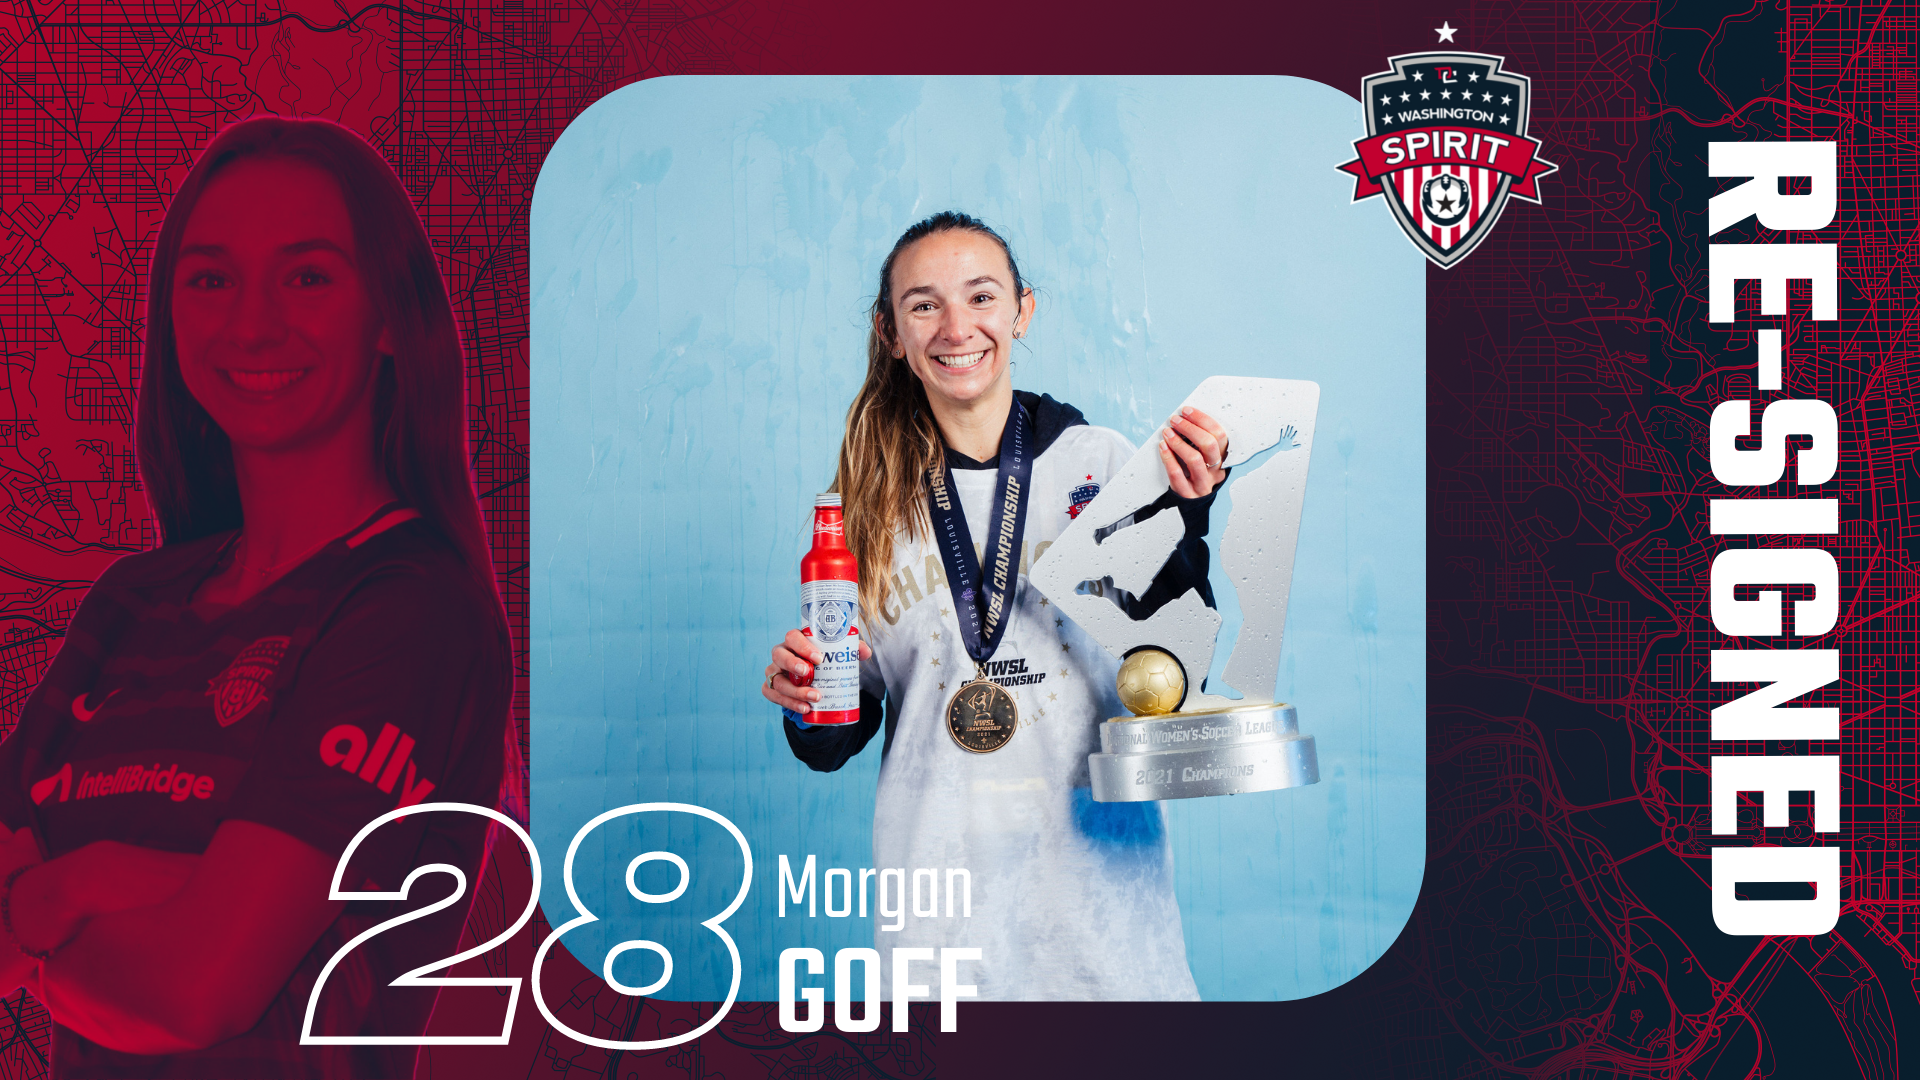 Washington Spirit Re-Sign Morgan Goff to New Contract Featured Image